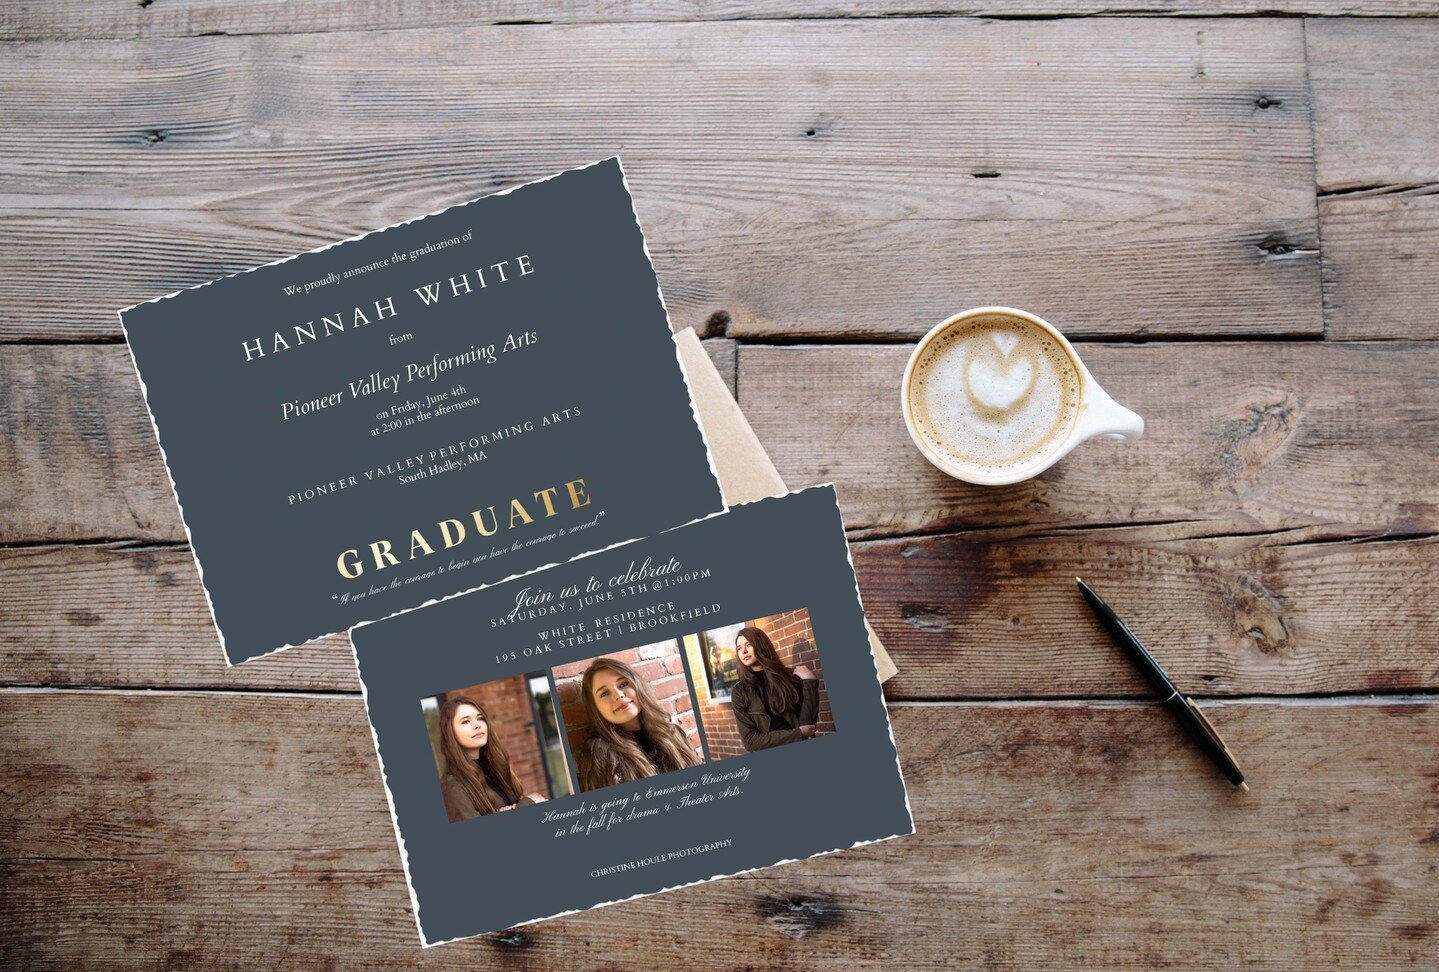 Announcement cards or invitations ⁠
⁠
You&rsquo;ve already had senior photos taken. Why not use this to make some announcement cards or graduation invitations. It is another opportunity to celebrate your Graduate. You can announce where they&rsquo;re